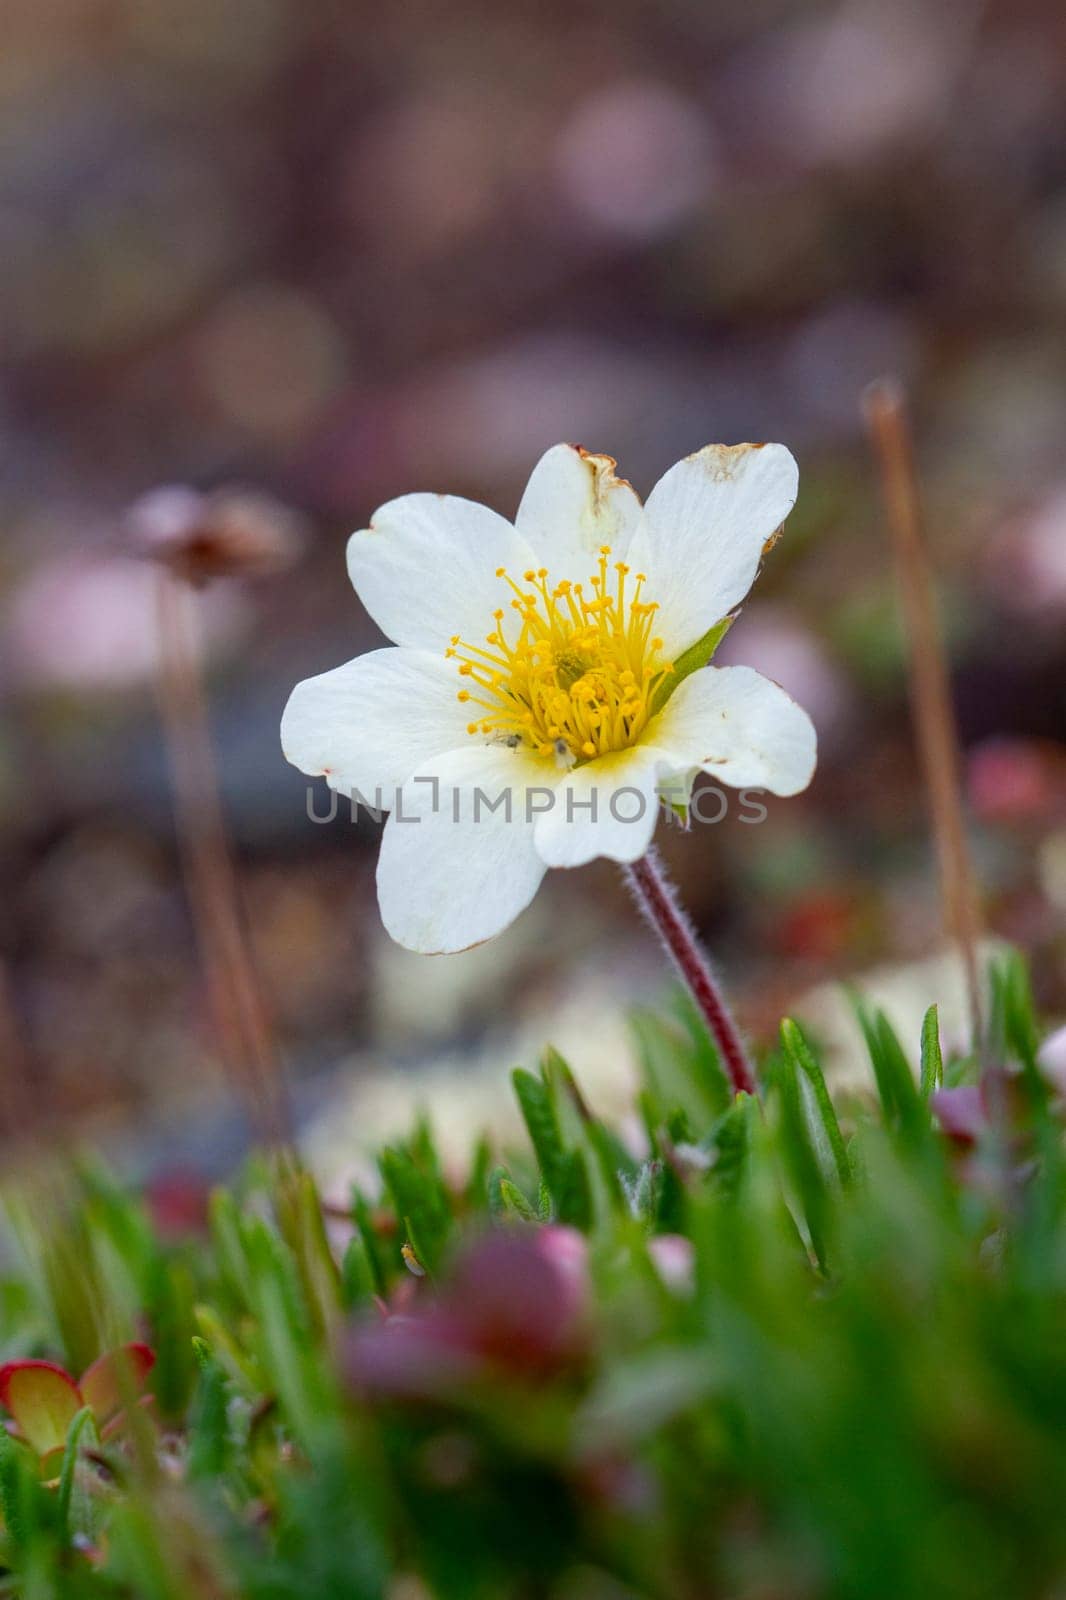 A single arctic mountain aven or alpine dryad flower in full bloom by Granchinho